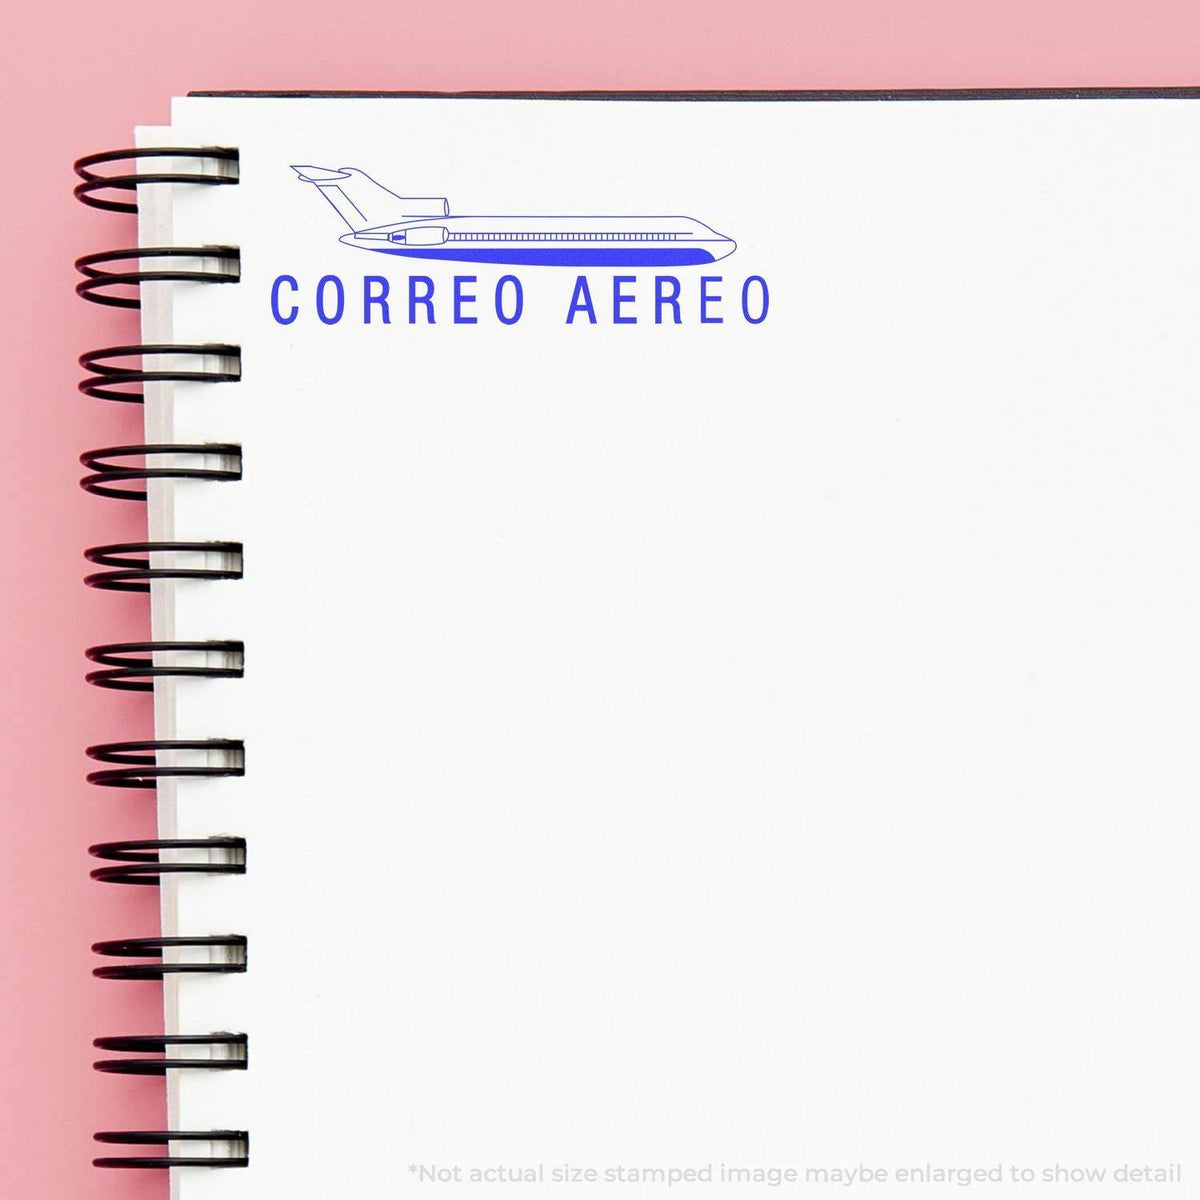 Large Self-Inking Correo Aero Stamp - Engineer Seal Stamps - Brand_Trodat, Impression Size_Large, Stamp Type_Self-Inking Stamp, Type of Use_Postal &amp; Mailing, Type of Use_Shipping &amp; Receiving